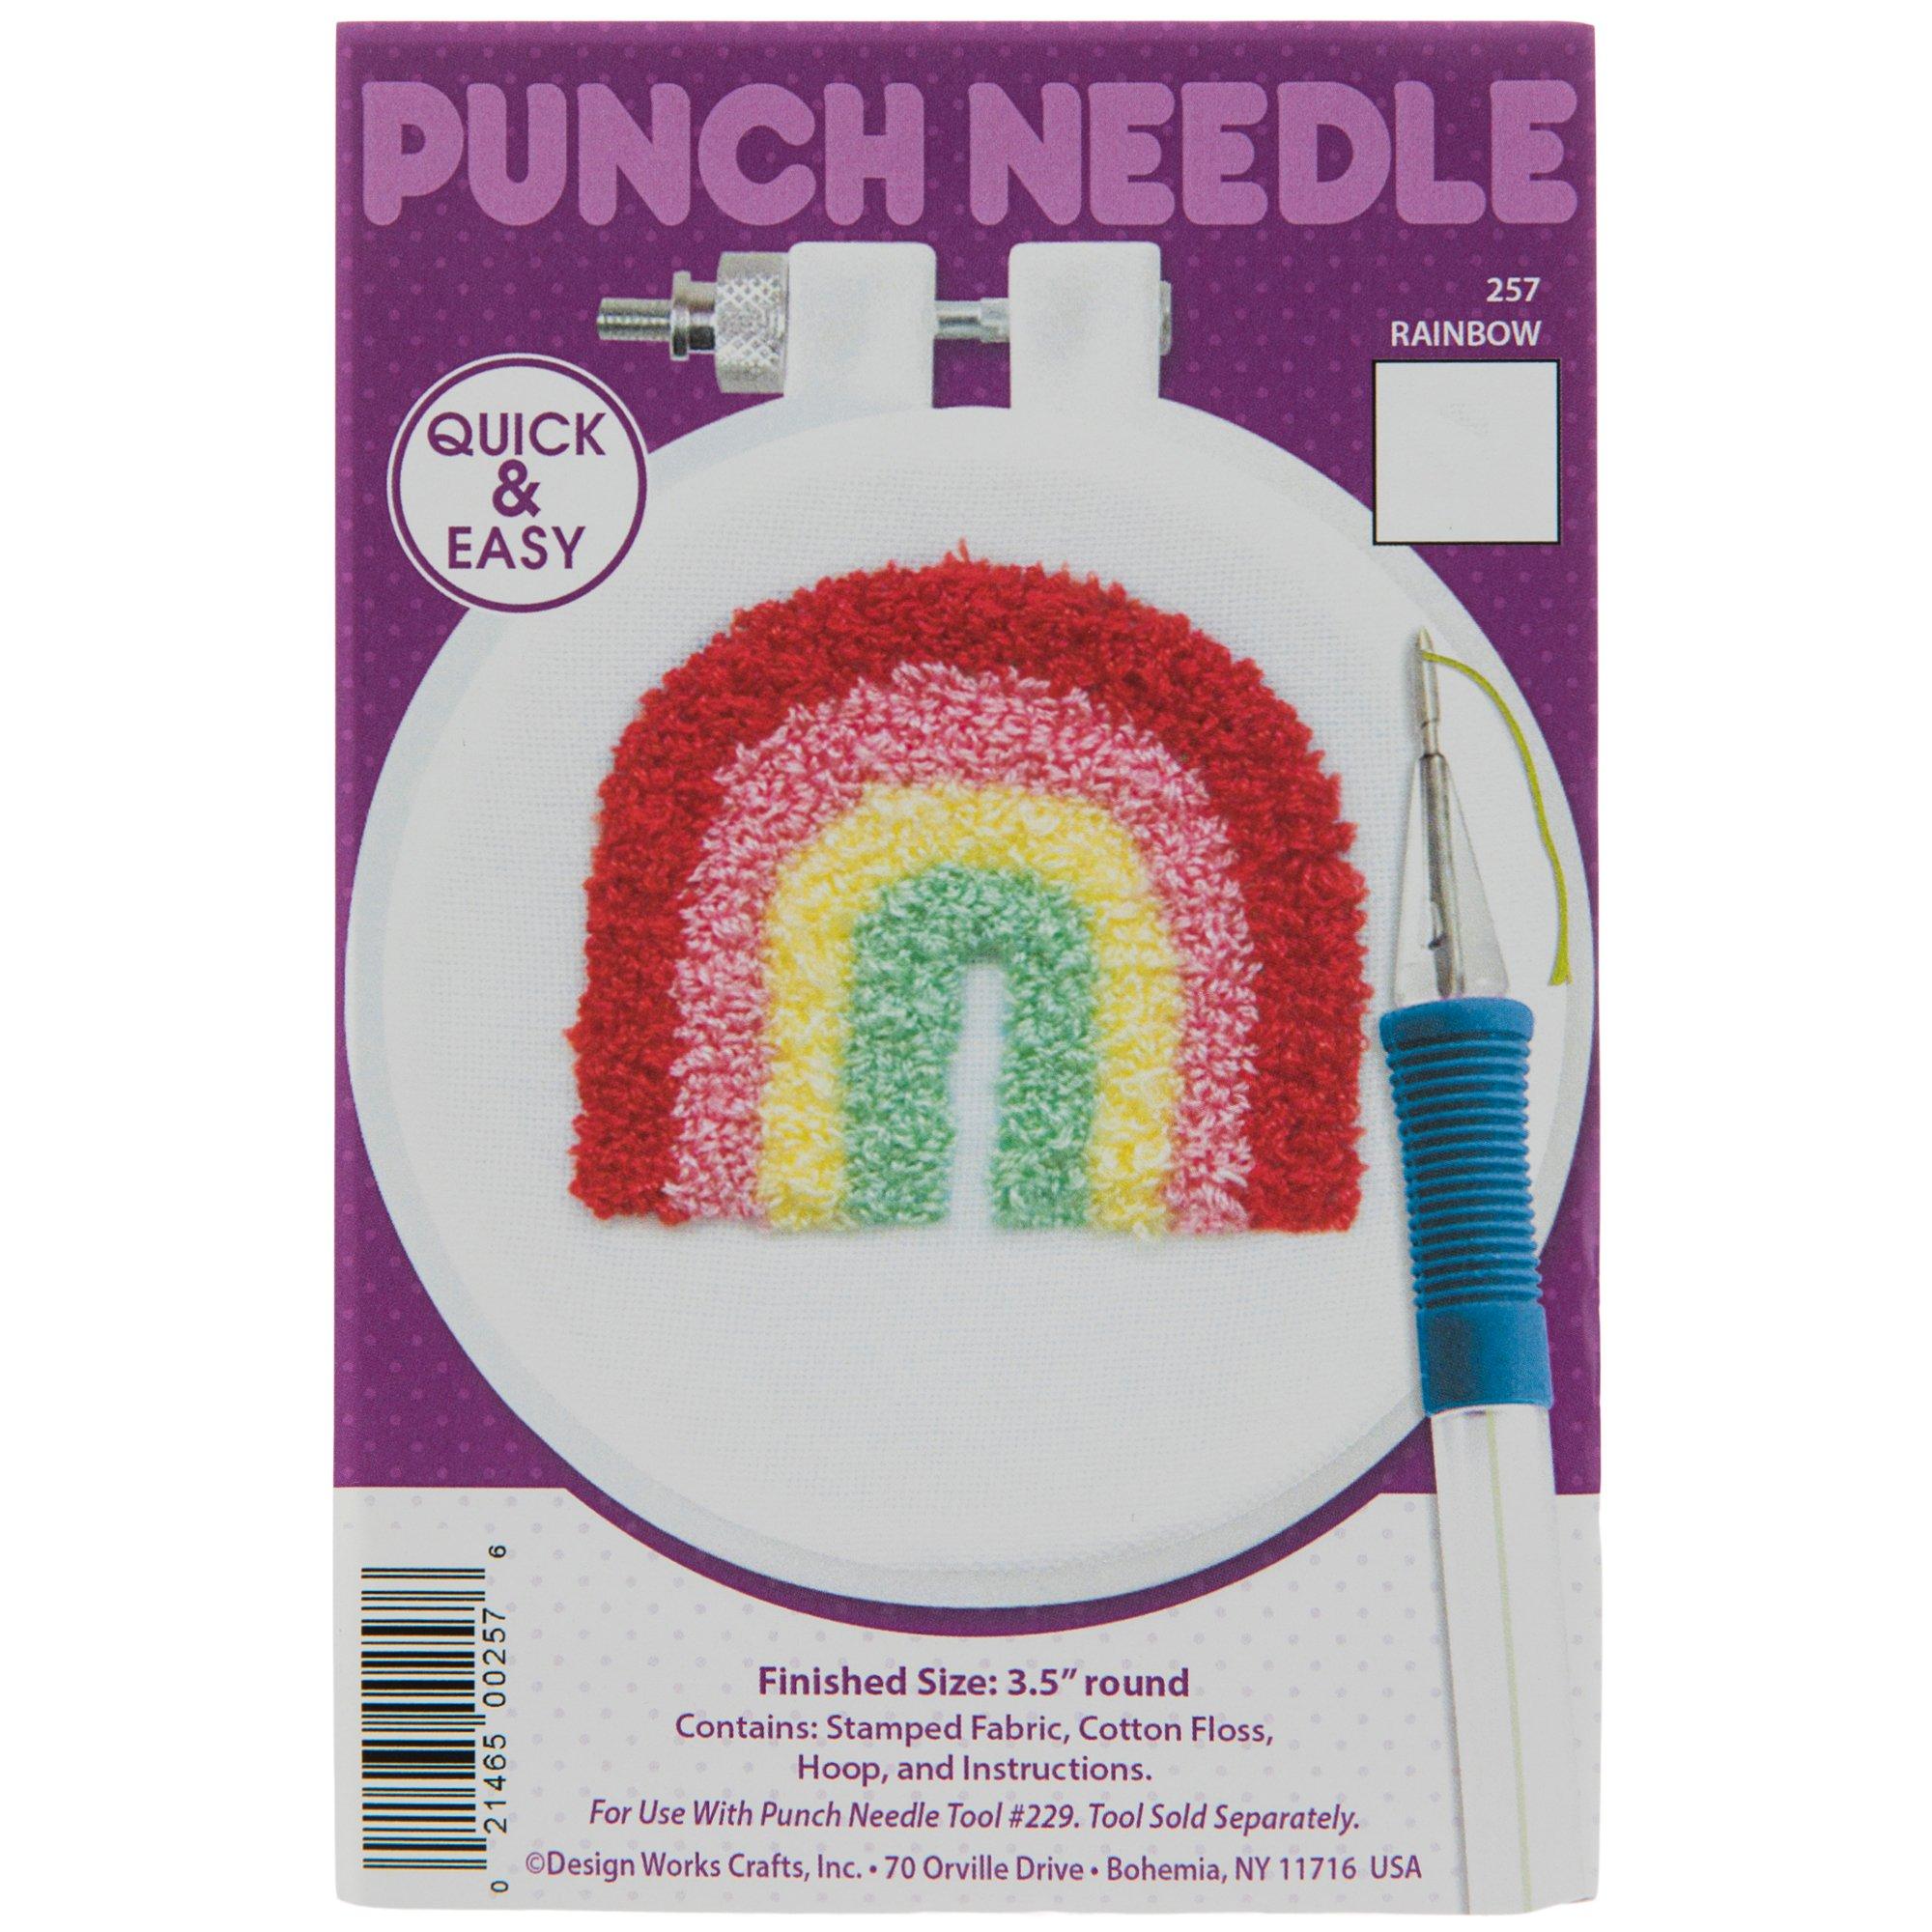 Rainbow Punch Needle Kit for Beginners